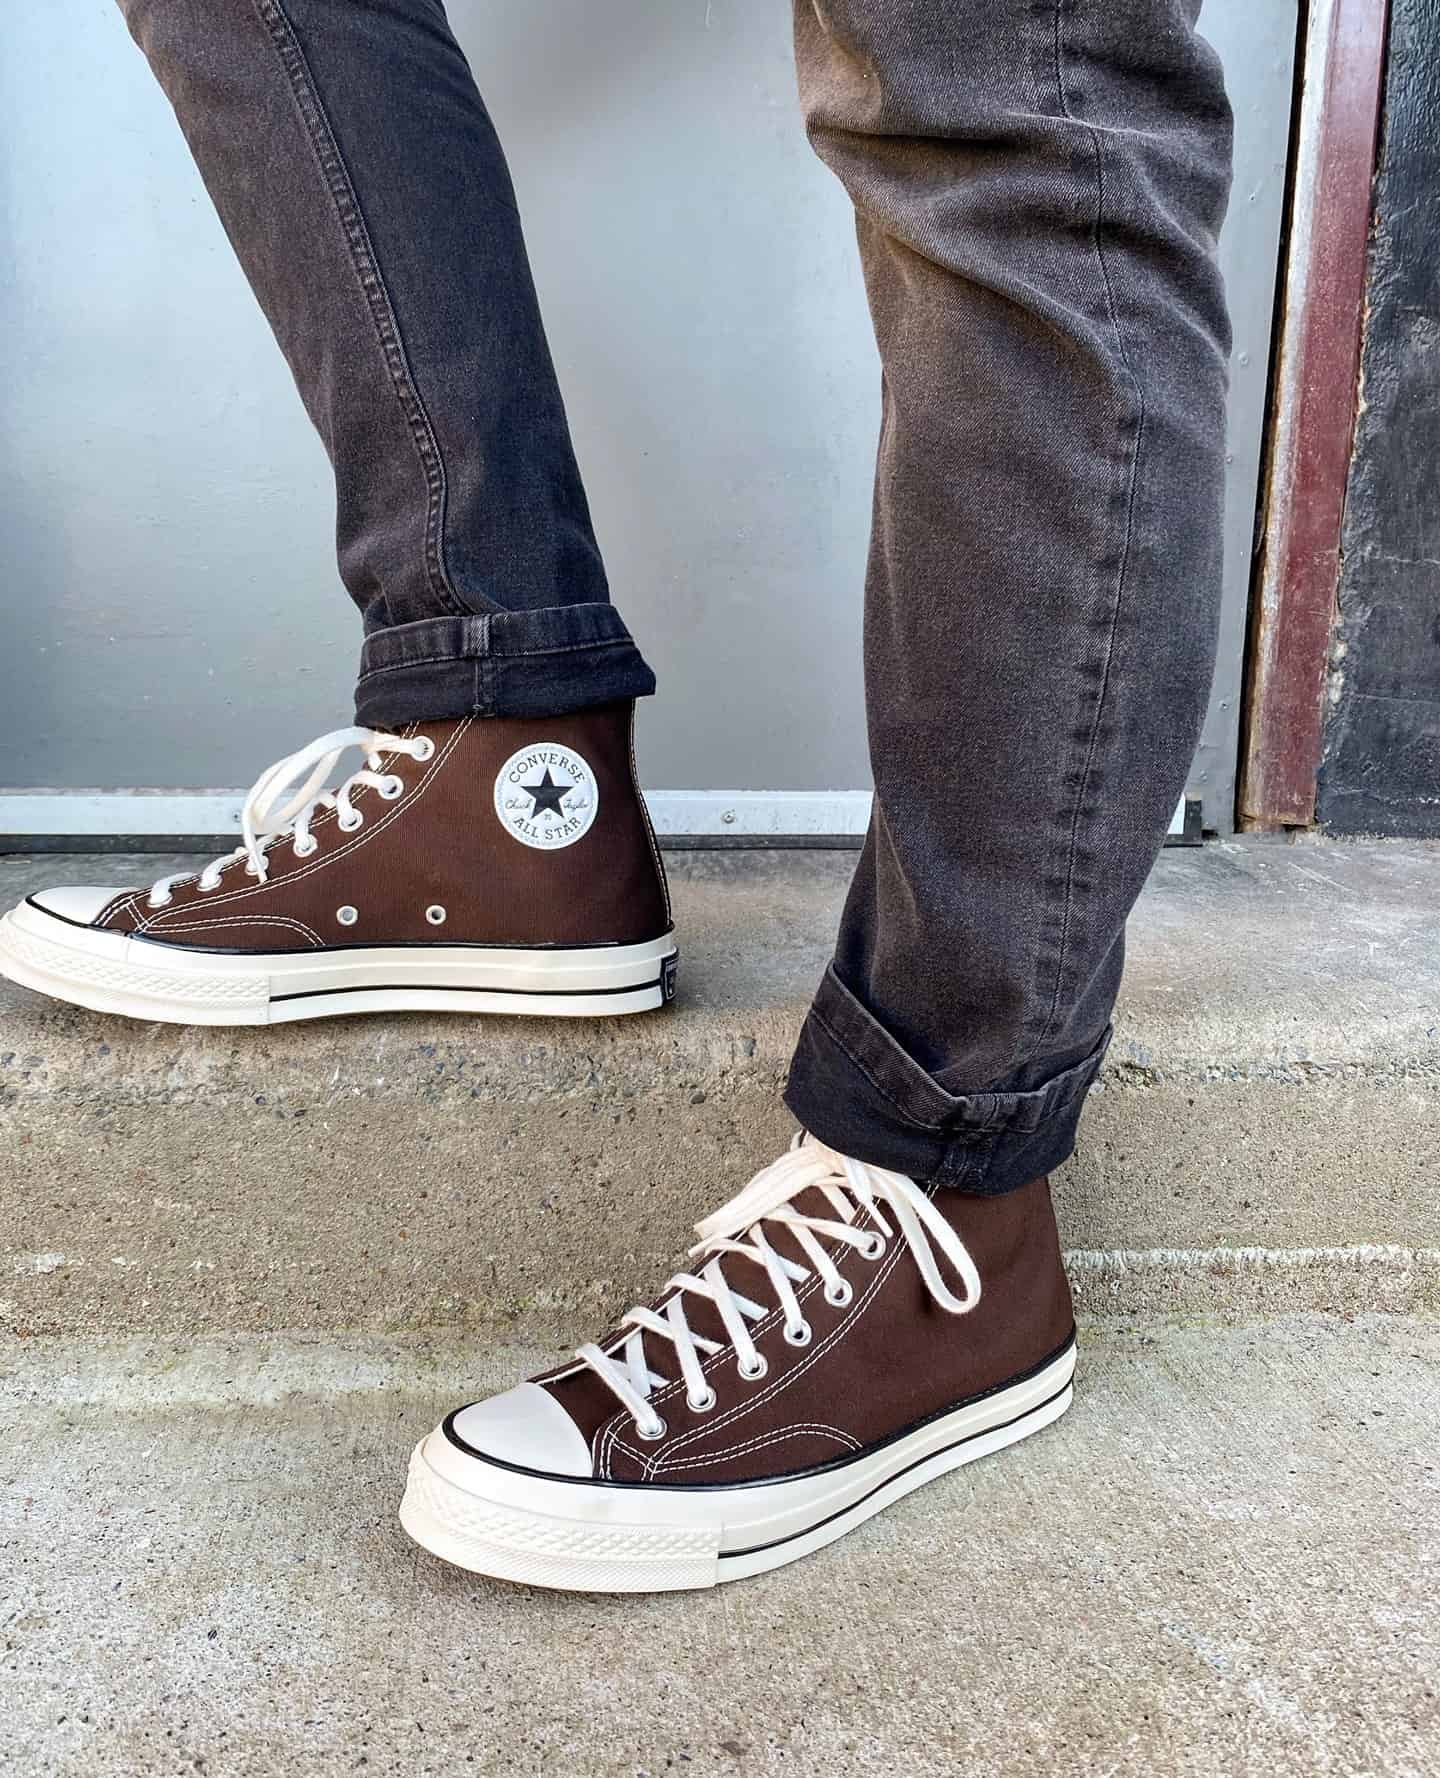 wearing a pair of brown hi tops by converse